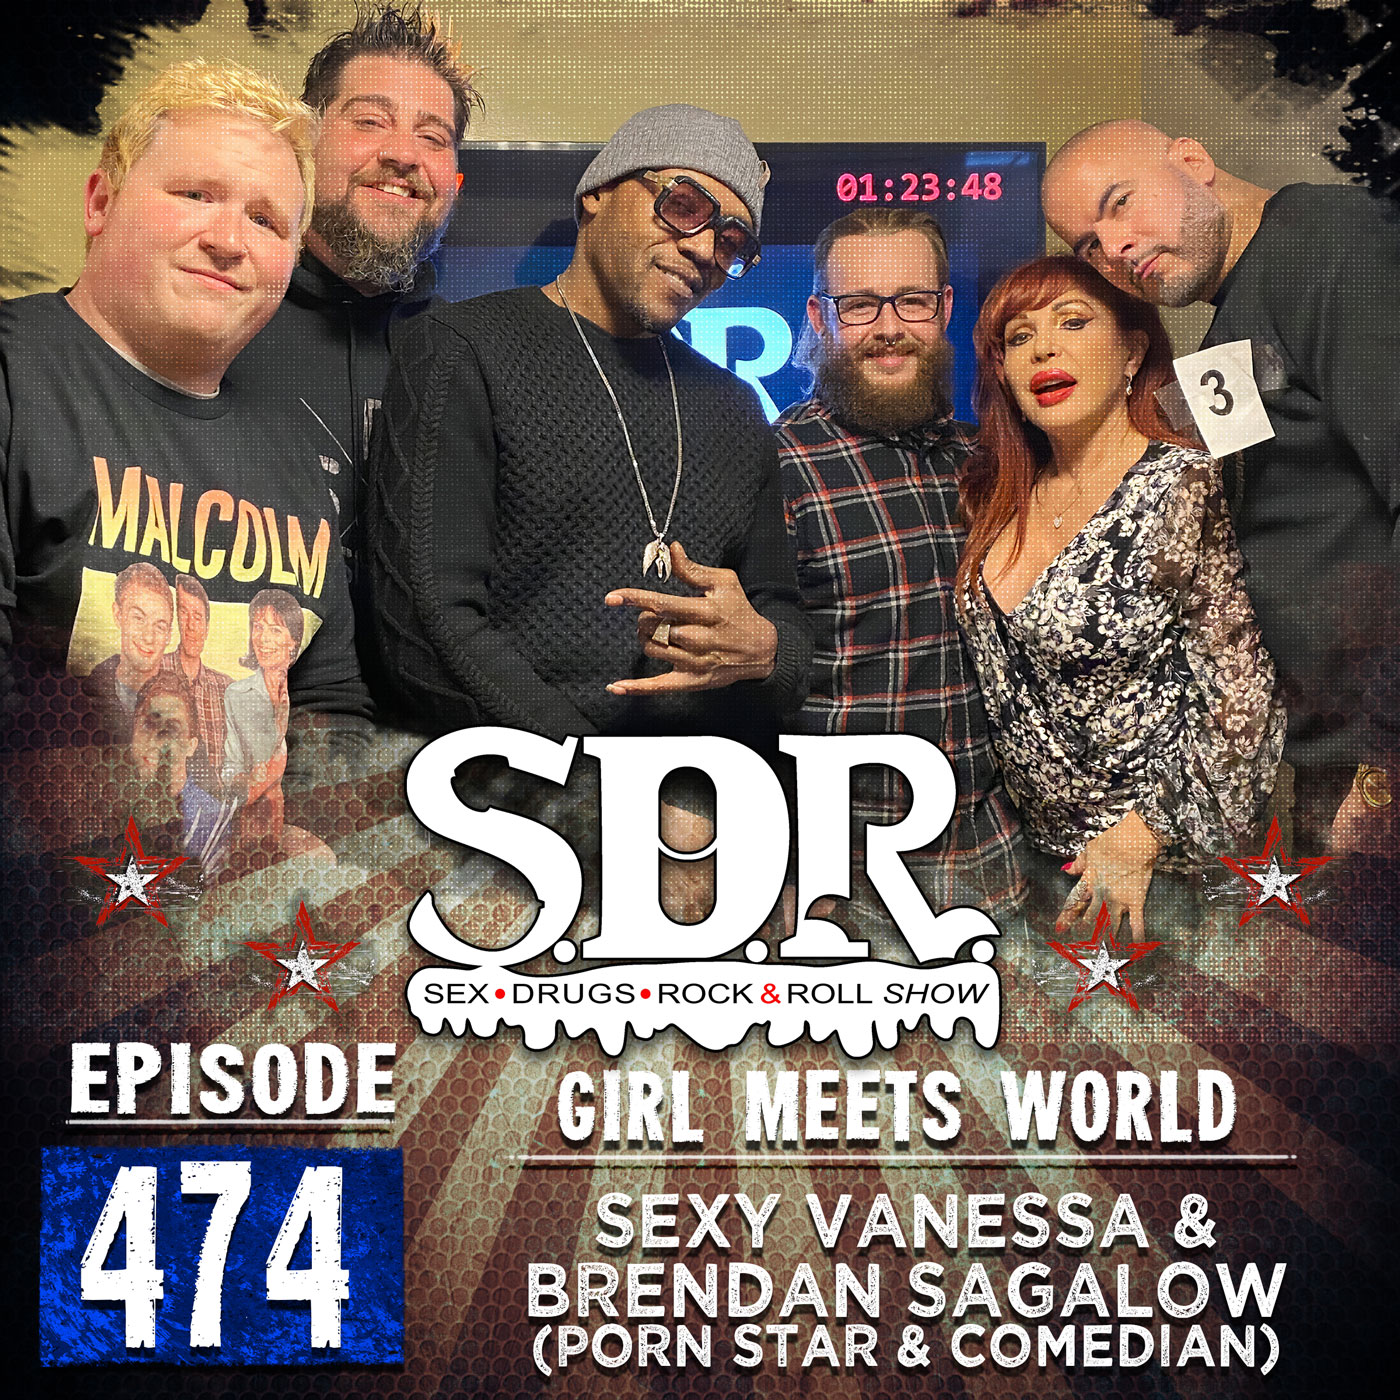 The SDR Show Plays A Dirty Dating Featuring Bachelorette Sexy Vanessa and Bachelor Number One Moe “The Monster” Johnson